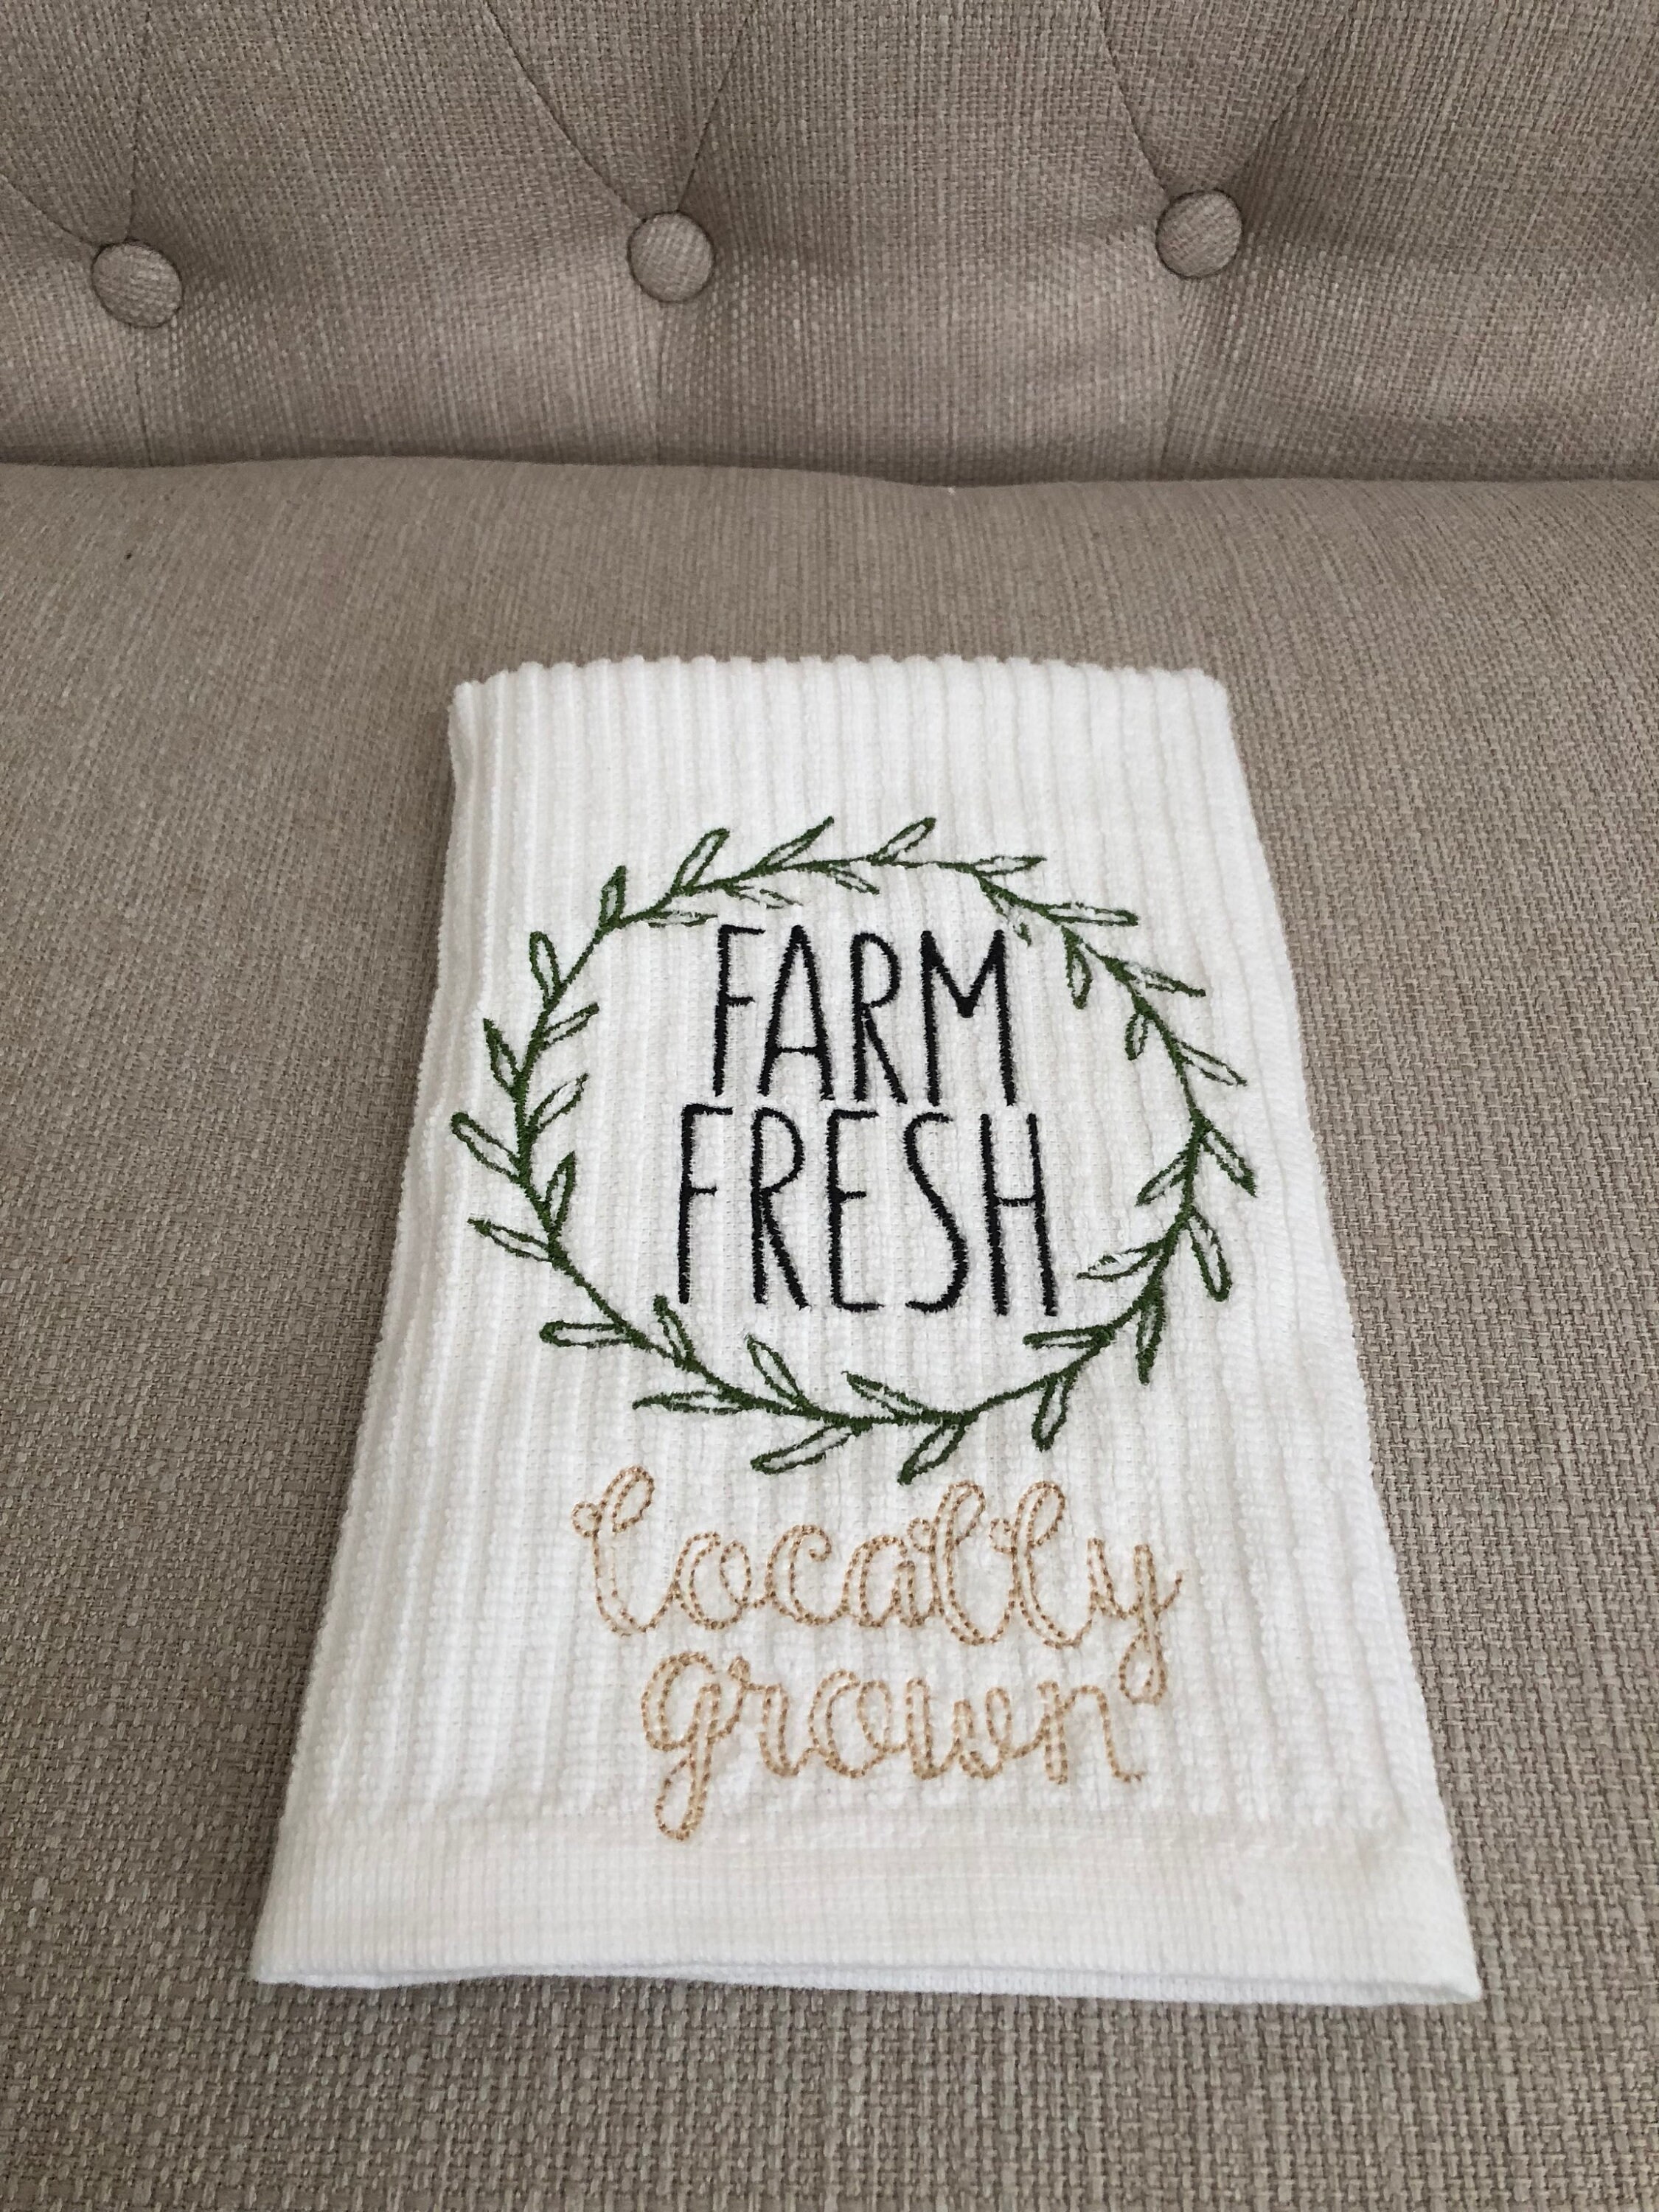 Embroidered Bar Mop Towels Farmhouse Kitchen Towels Farm 